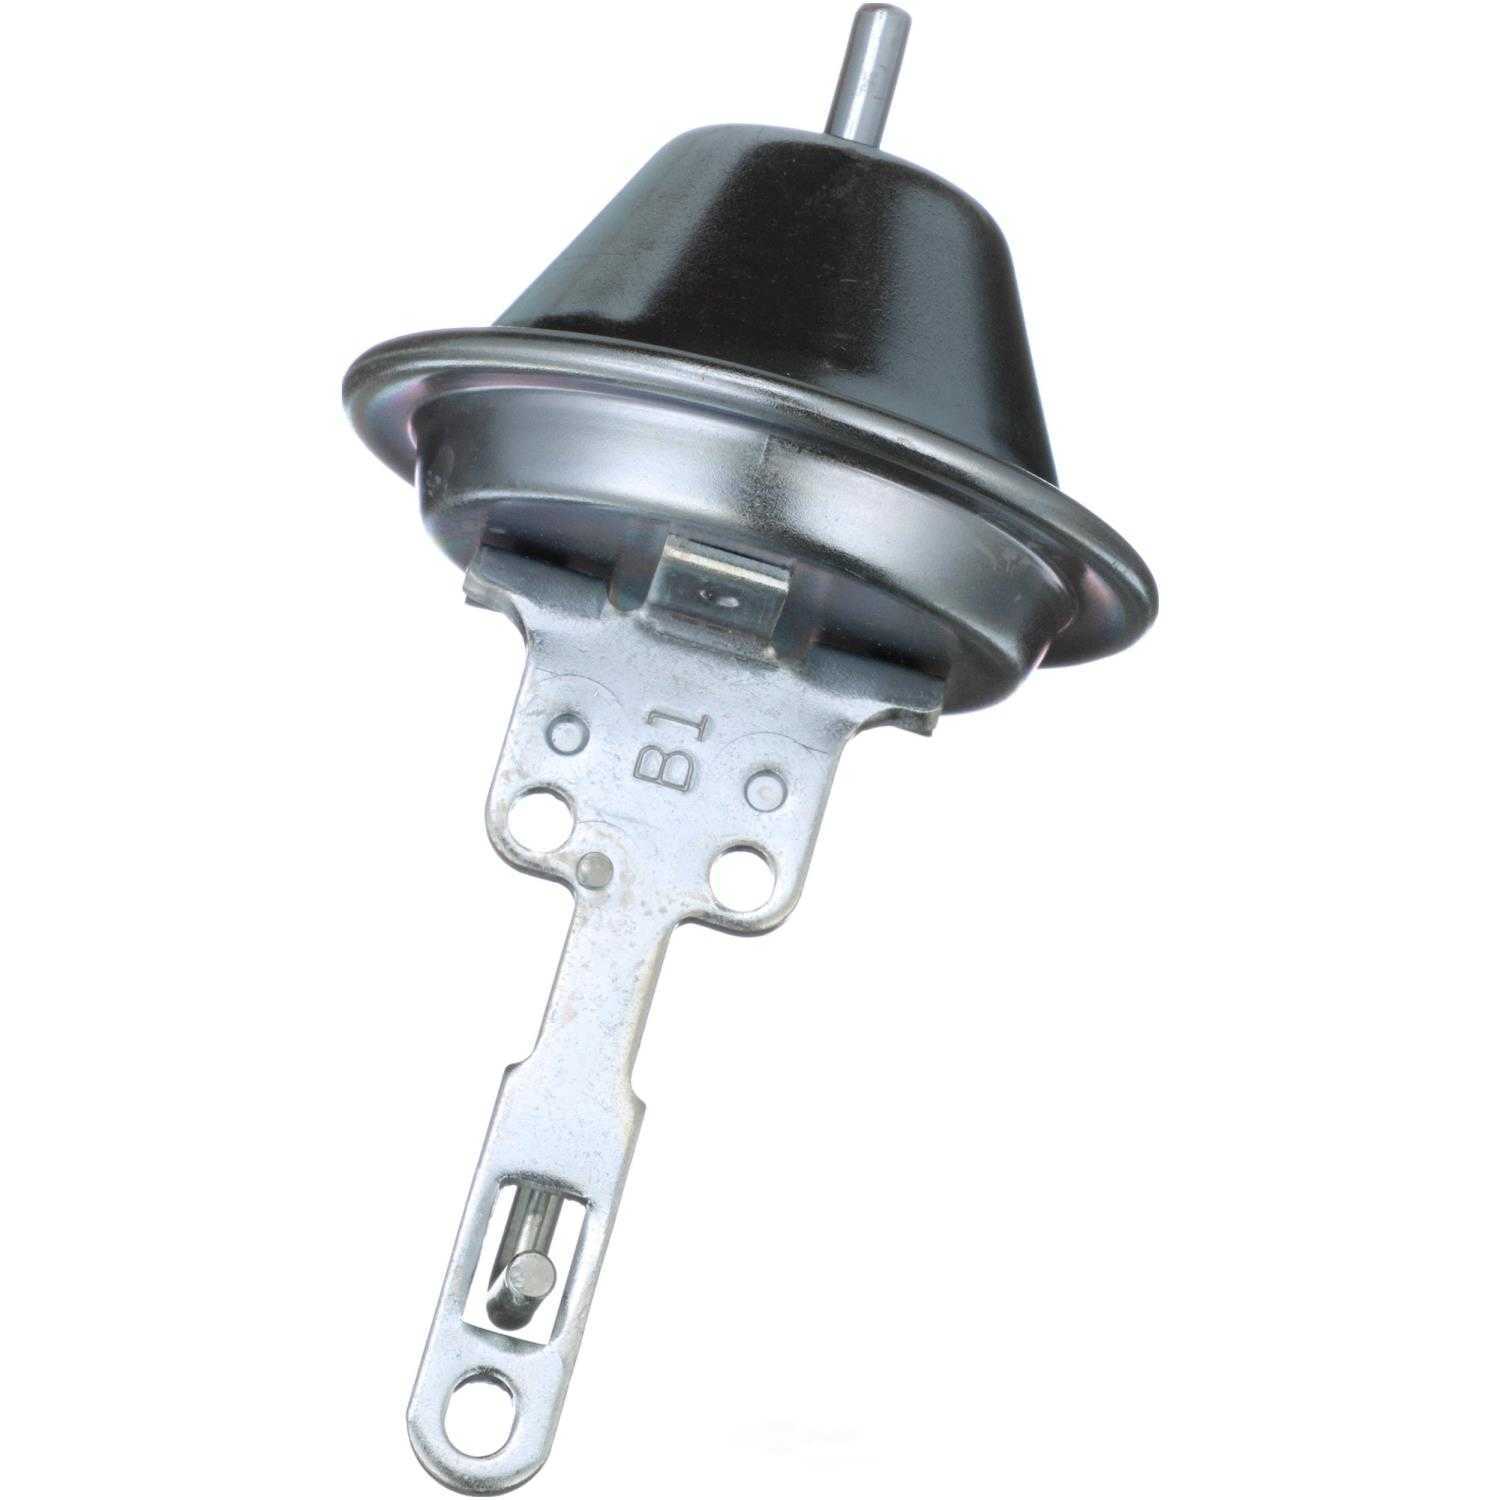 STANDARD MOTOR PRODUCTS - Distributor Vacuum Advance - STA VC-24A